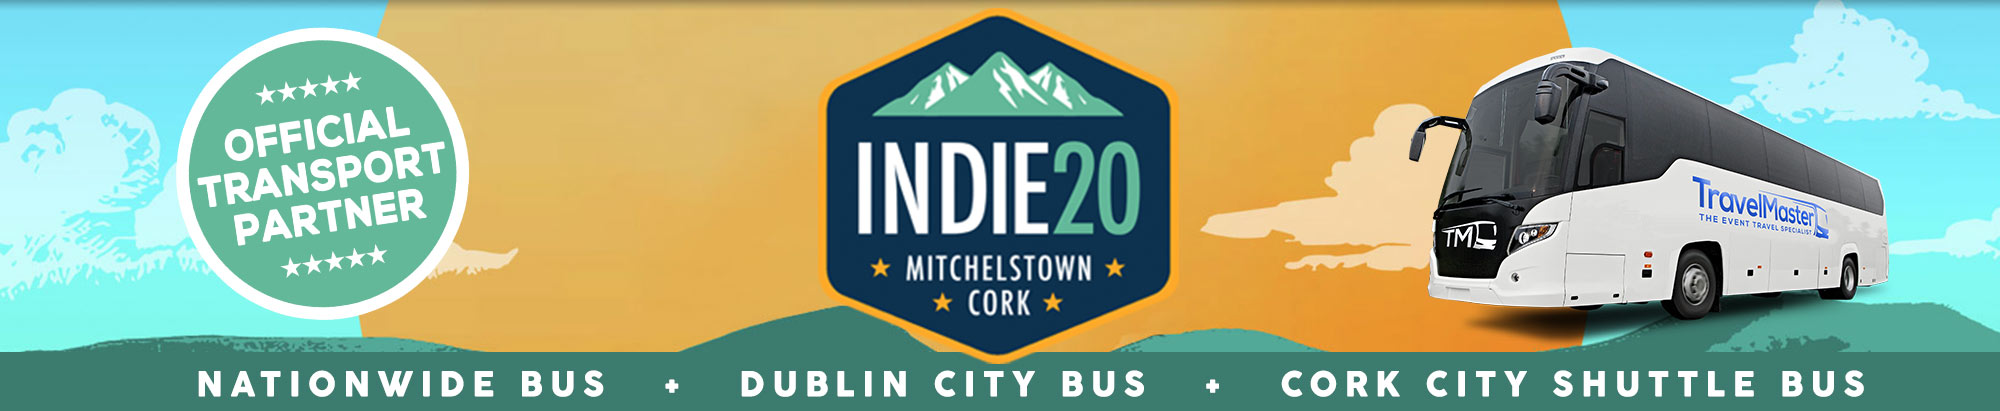 Bus to Indie - Indiependence Festival